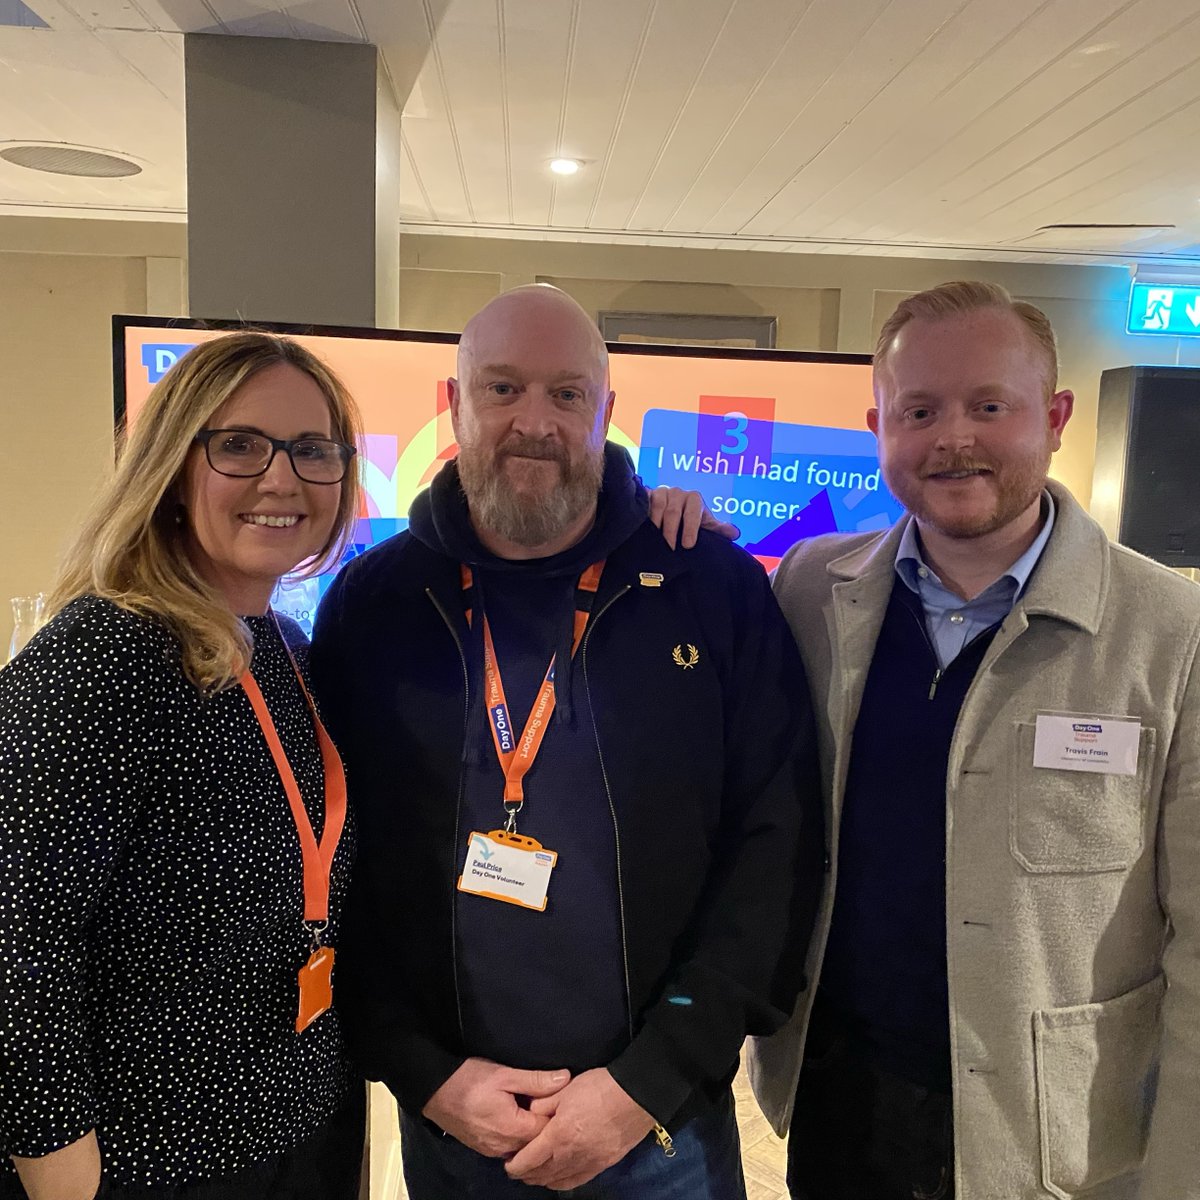 We were delighted to host a drinks reception last night to celebrate the launch of our services in @NCAlliance_NHS with a brilliant speech from peer supporter Paul Price 🧡 Massive thank you to event sponsors @hudgellsol @irwinmitchell @JMWInYourCorner @LeighDay_Law